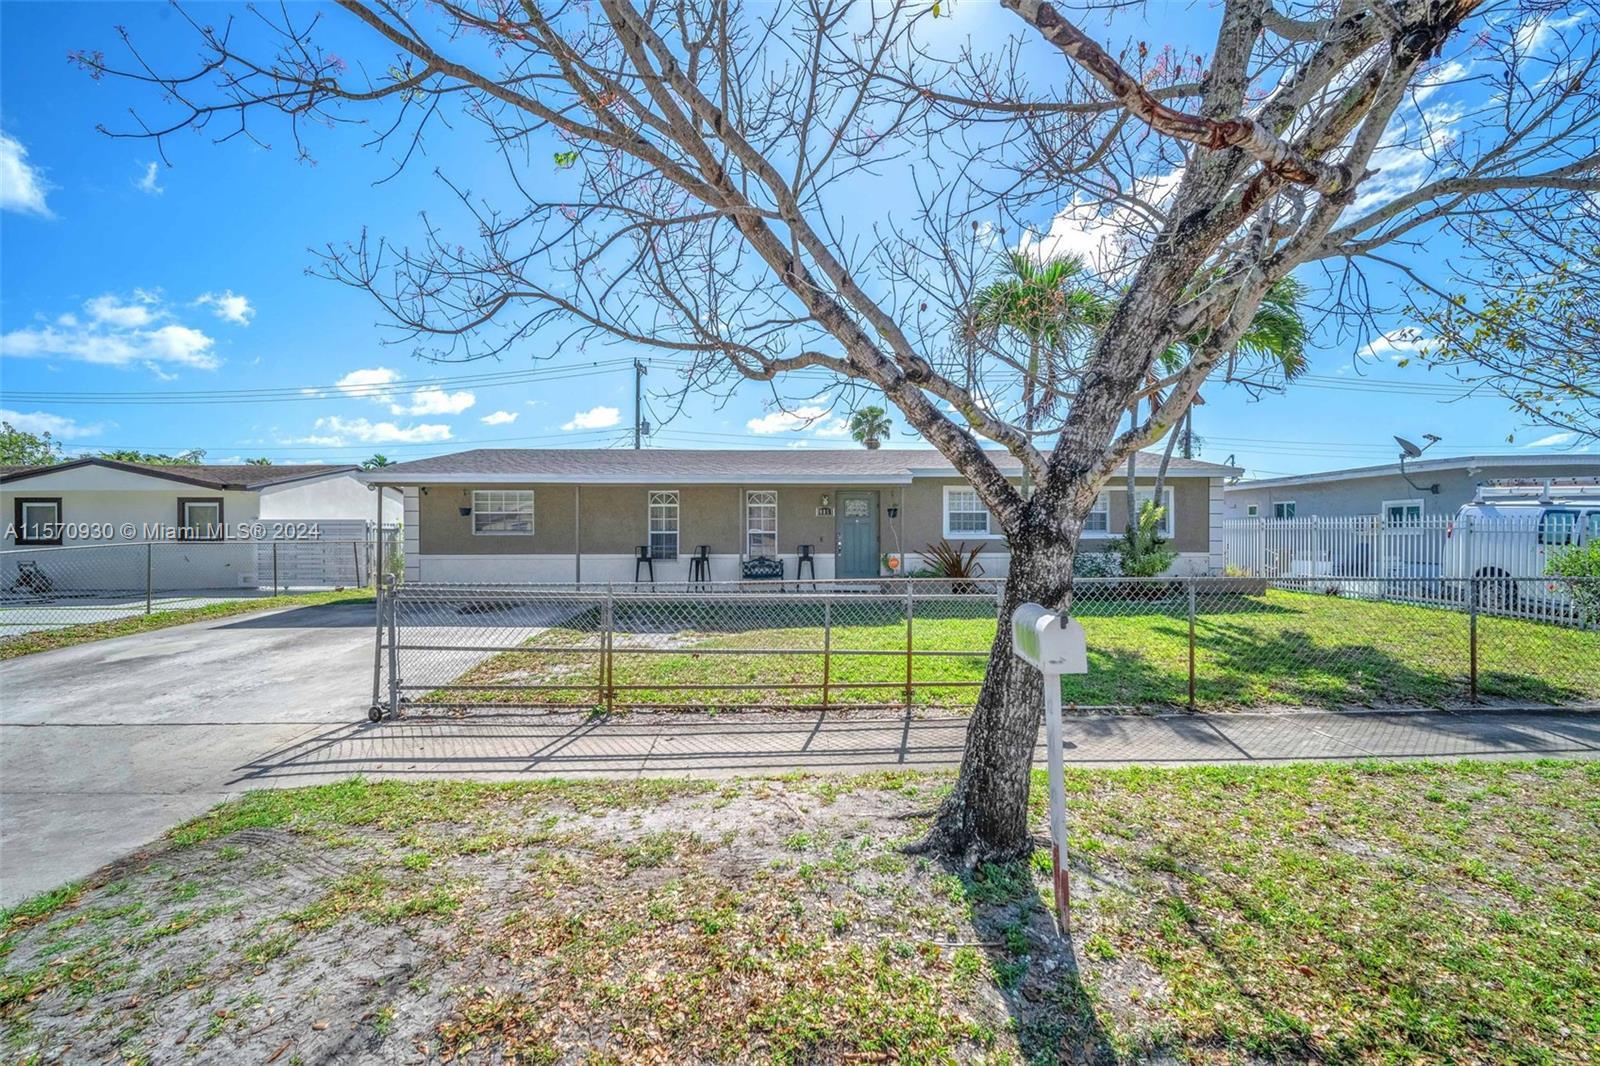 Photo of 18011 NW 44th Ave in Miami Gardens, FL